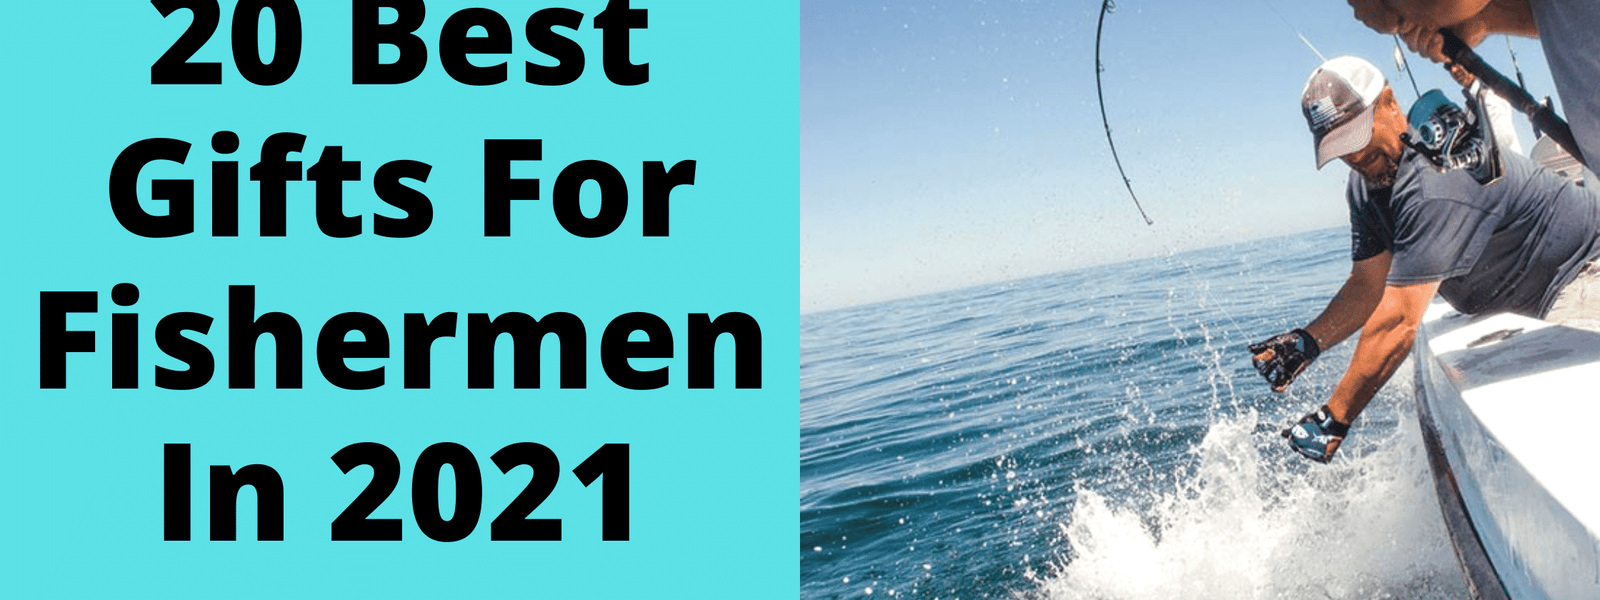 Gift Guide: The Best Gifts for Fisherman (Reviewed By Fishermen) In 20